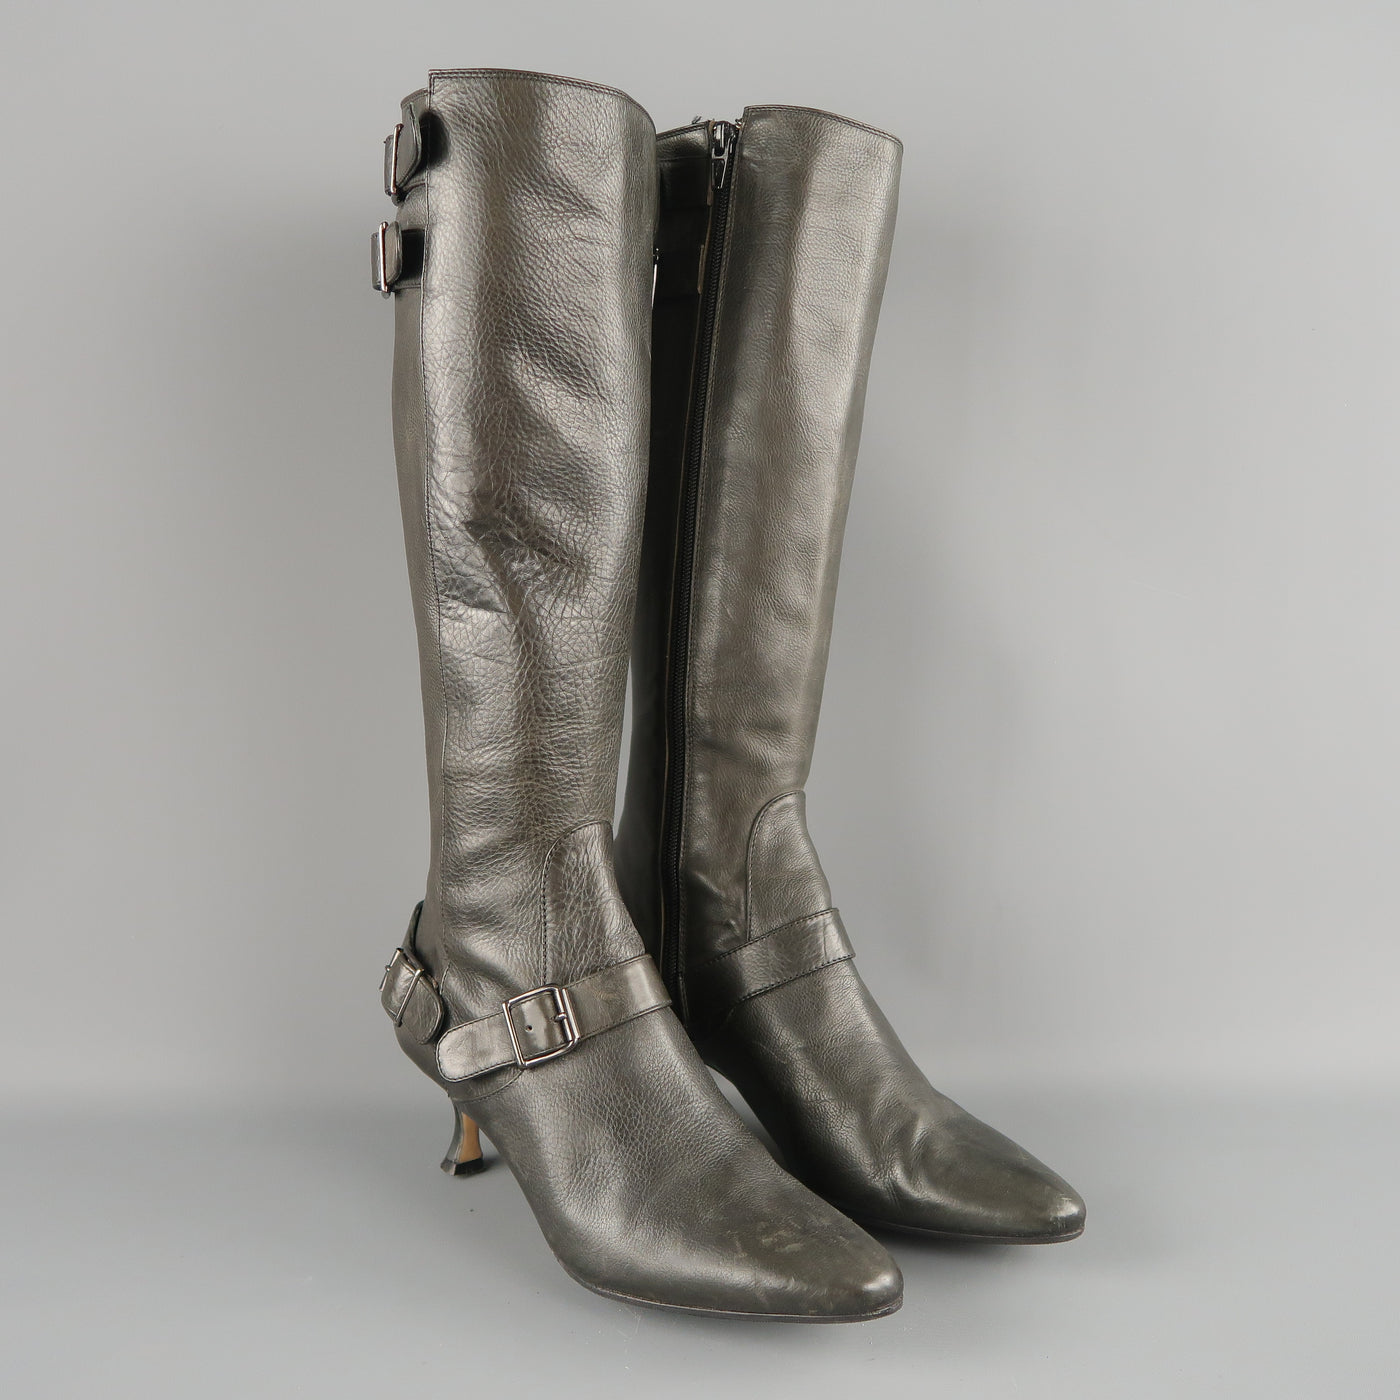 MANOLO BLAHNIK Size 6.5 Slate Gray Leather Pointed Knee High Boots